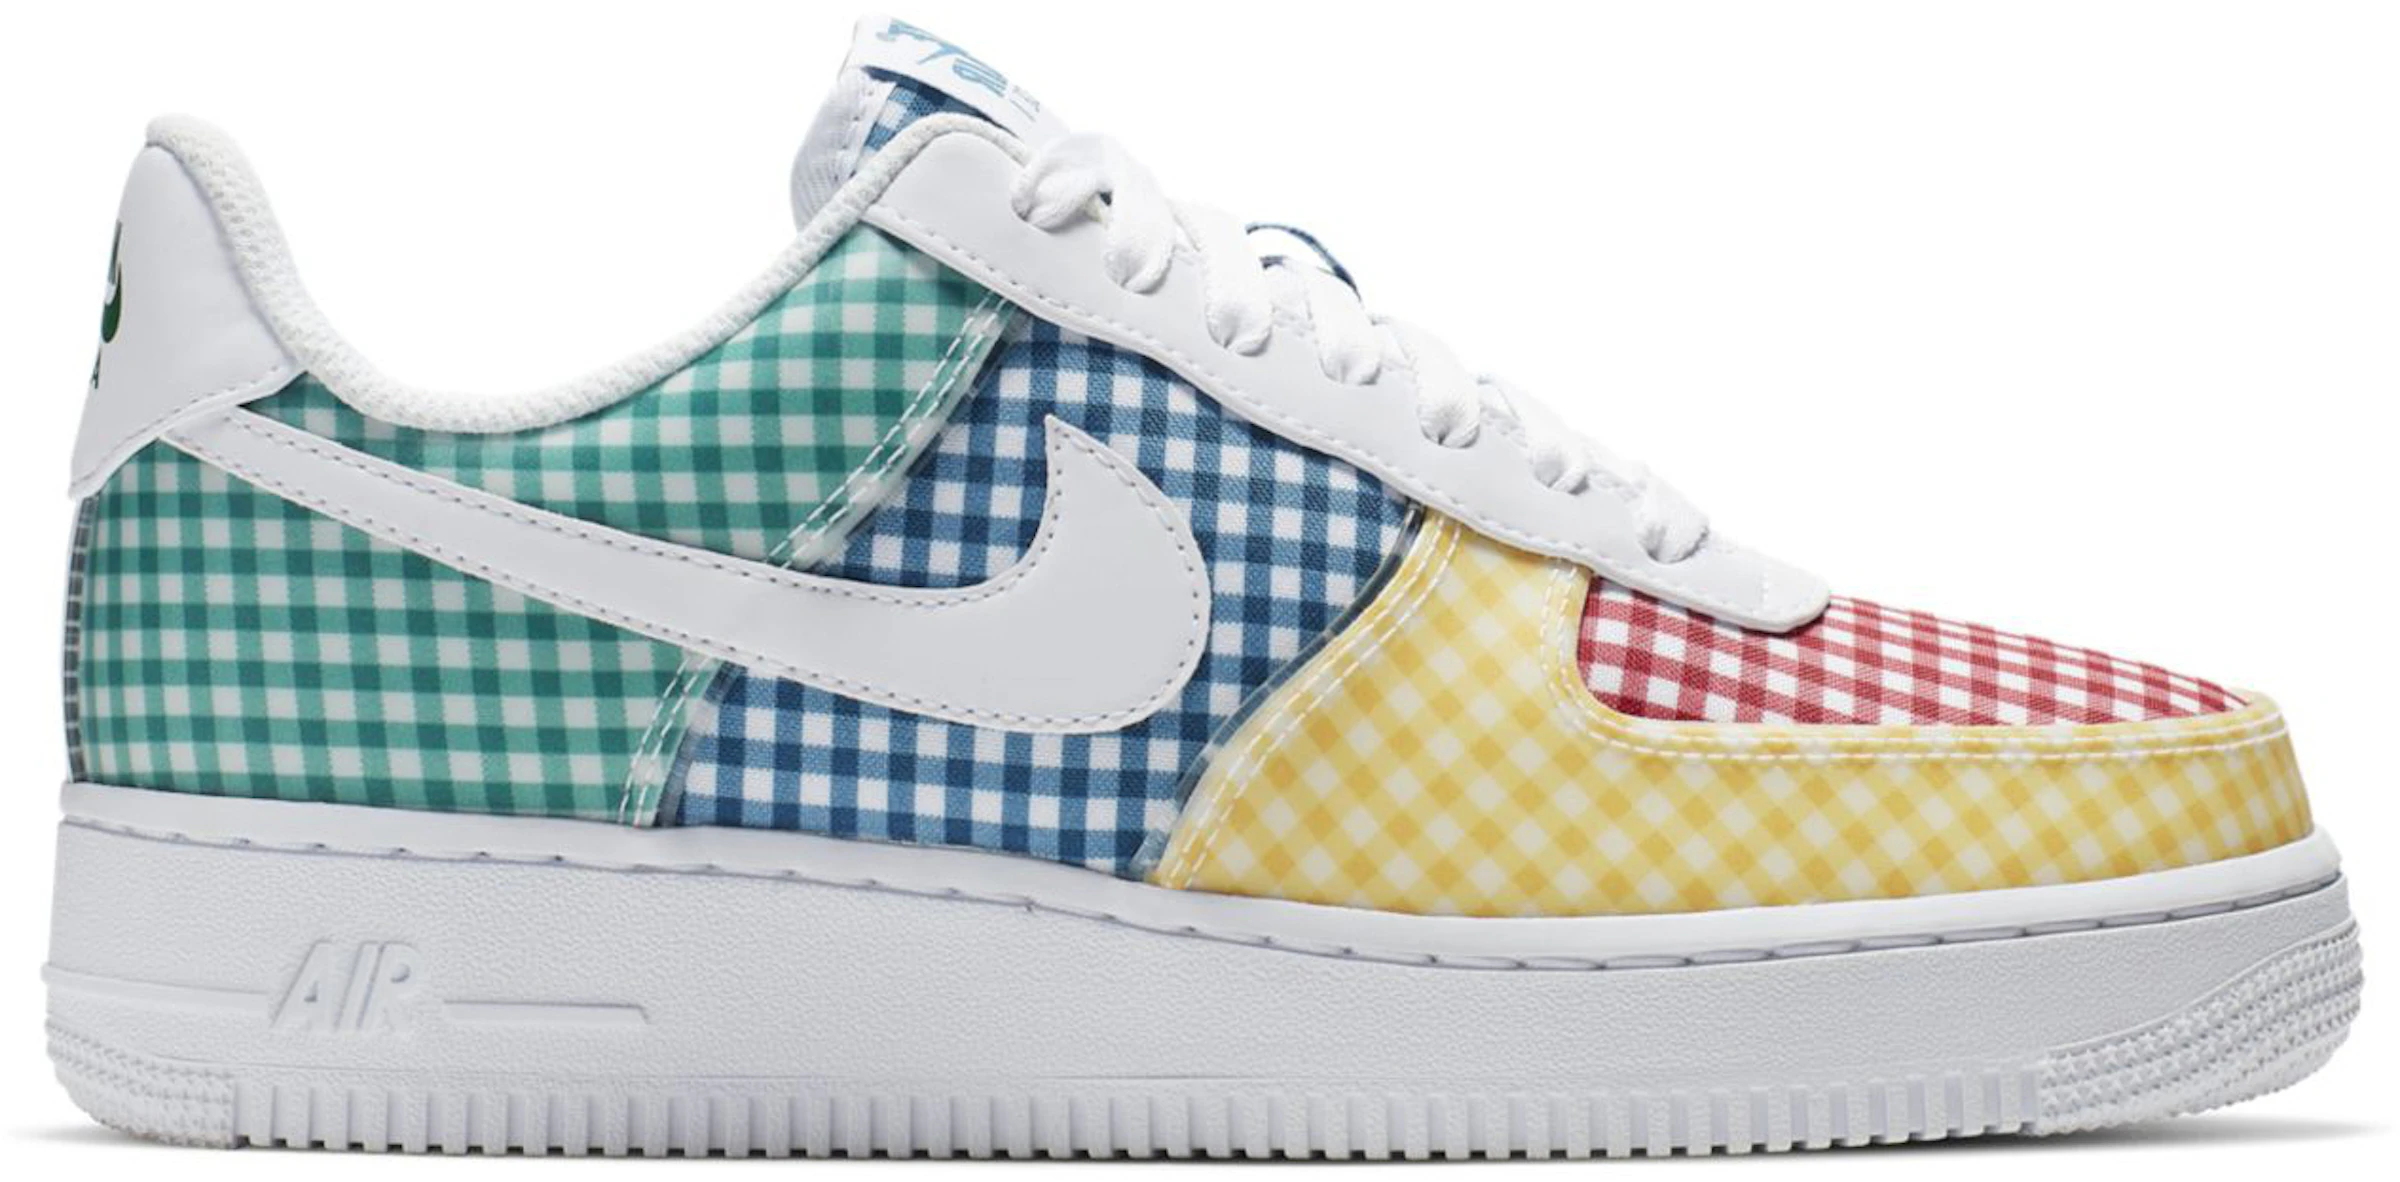 Nike Air Force 1 Low QS Pack Multicolor (Women's) - BV4891-100 - US